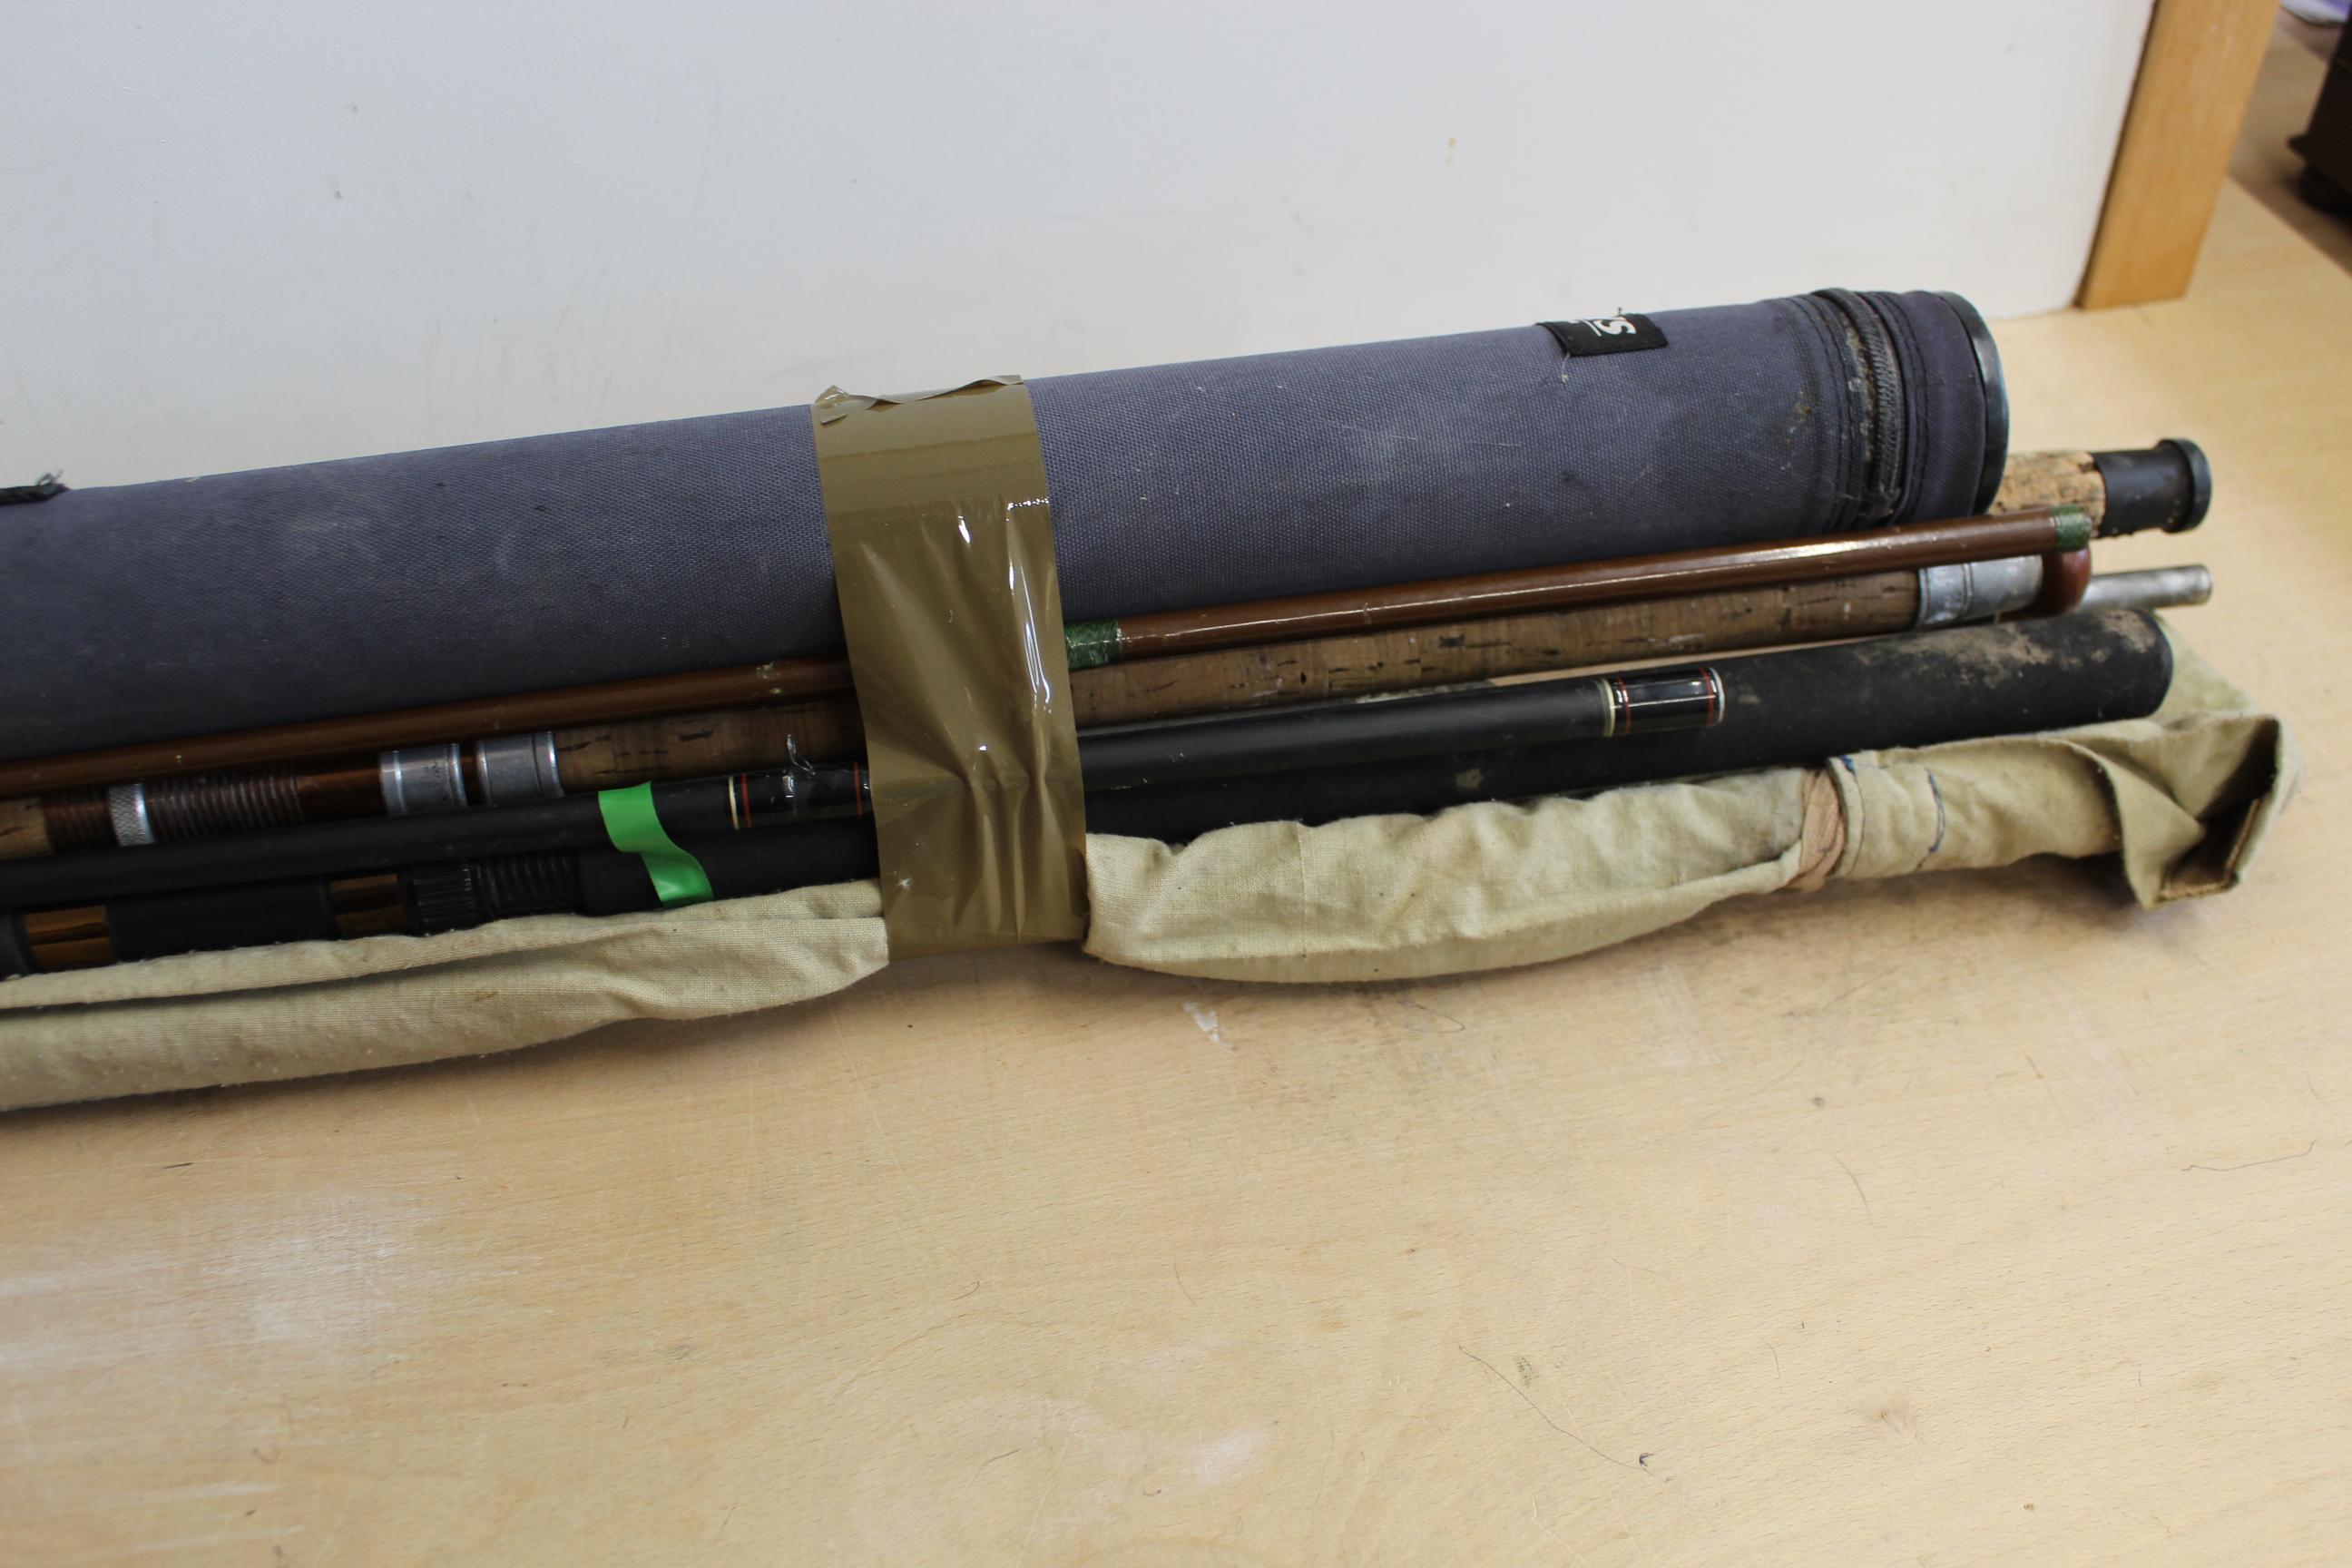 A Greys Xi two piece fly rod in case, a Gemko two piece fly rod, - Image 3 of 3